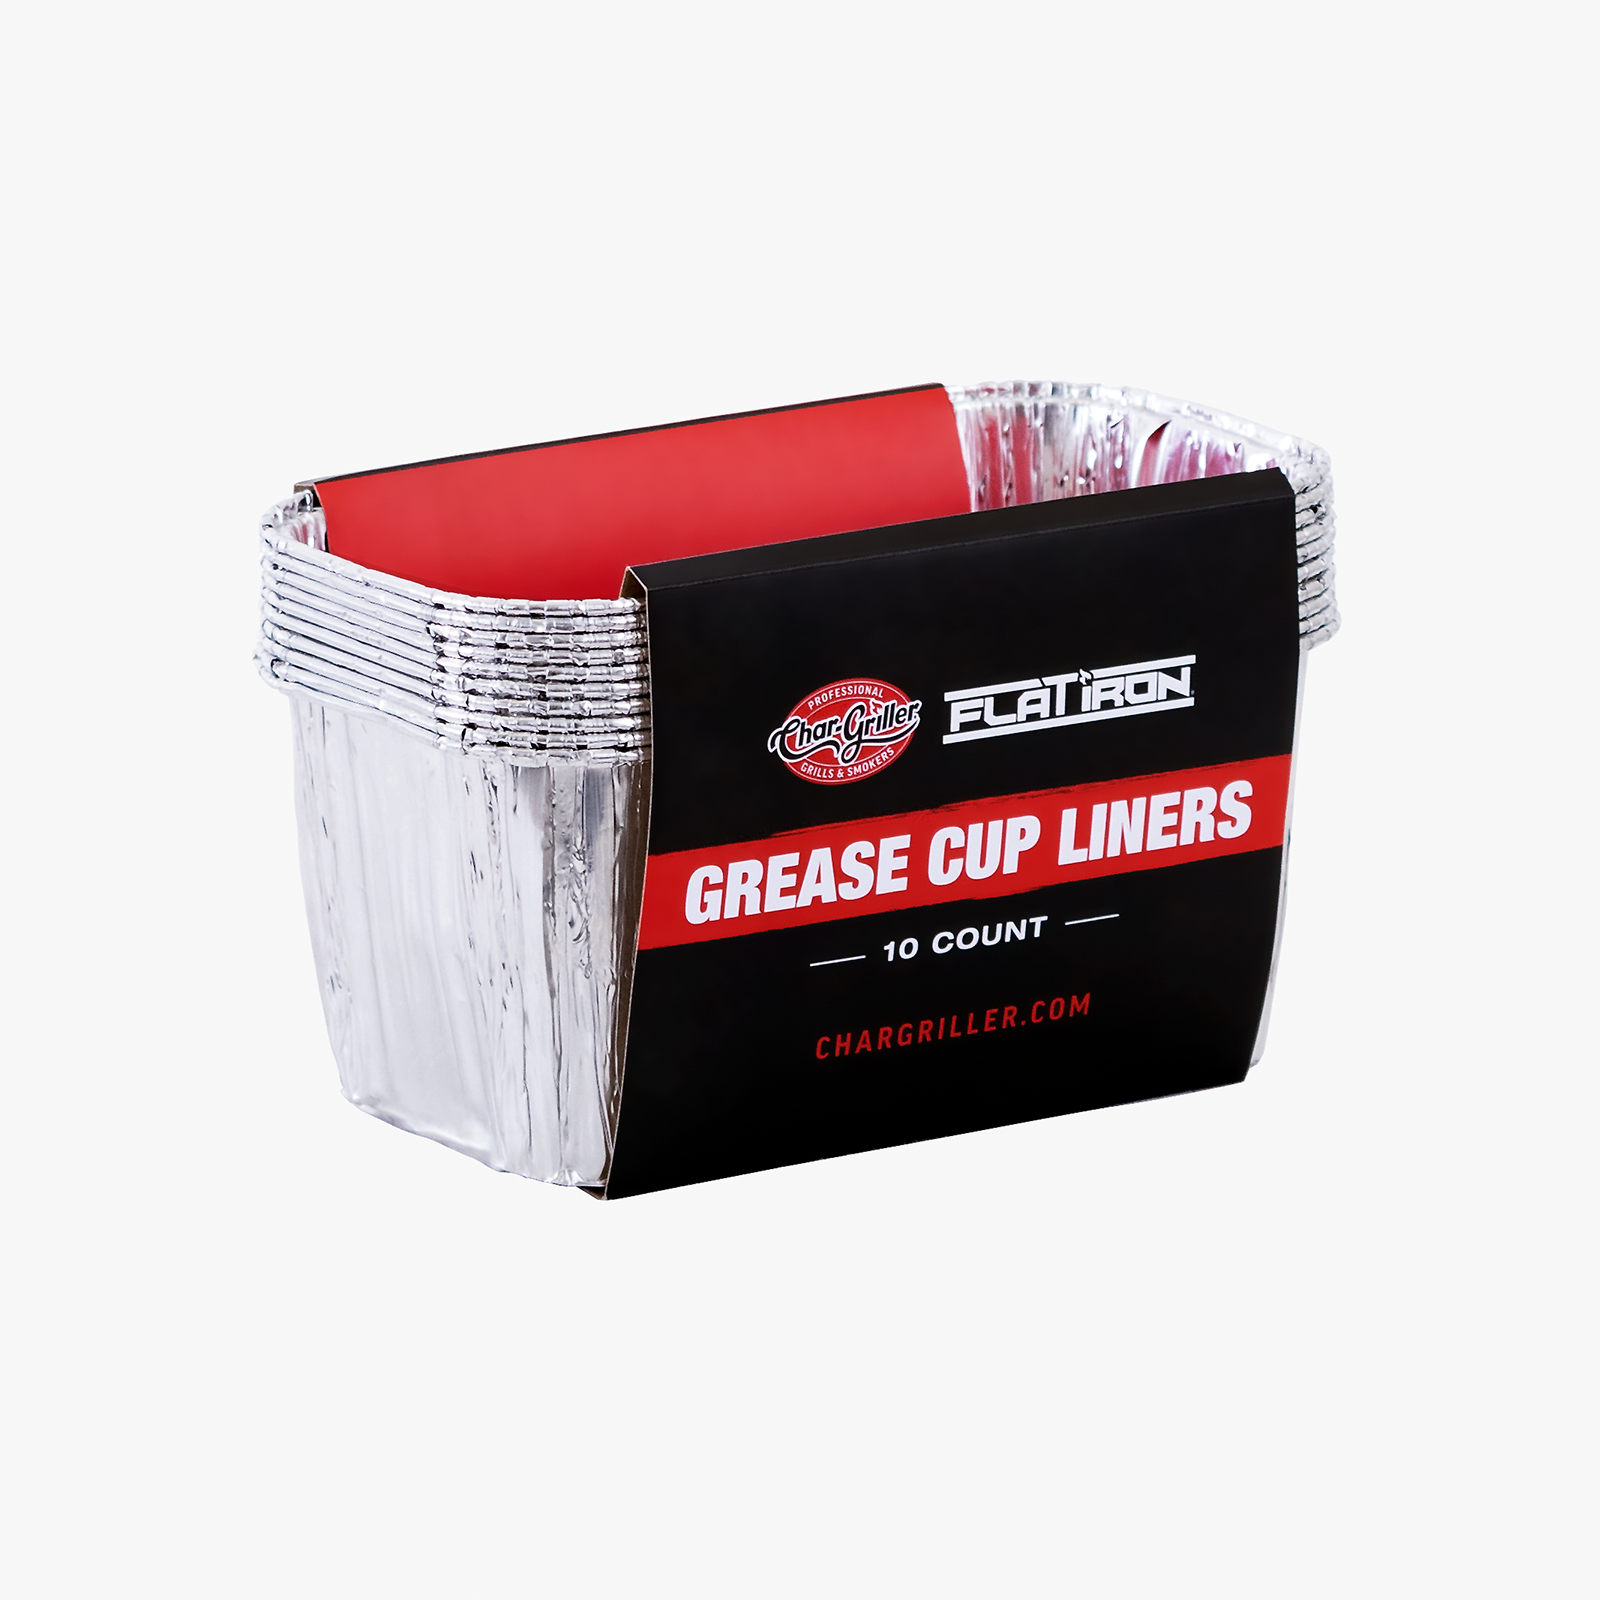 Flat Iron® Griddle Grease Cup Liners - 10 pack